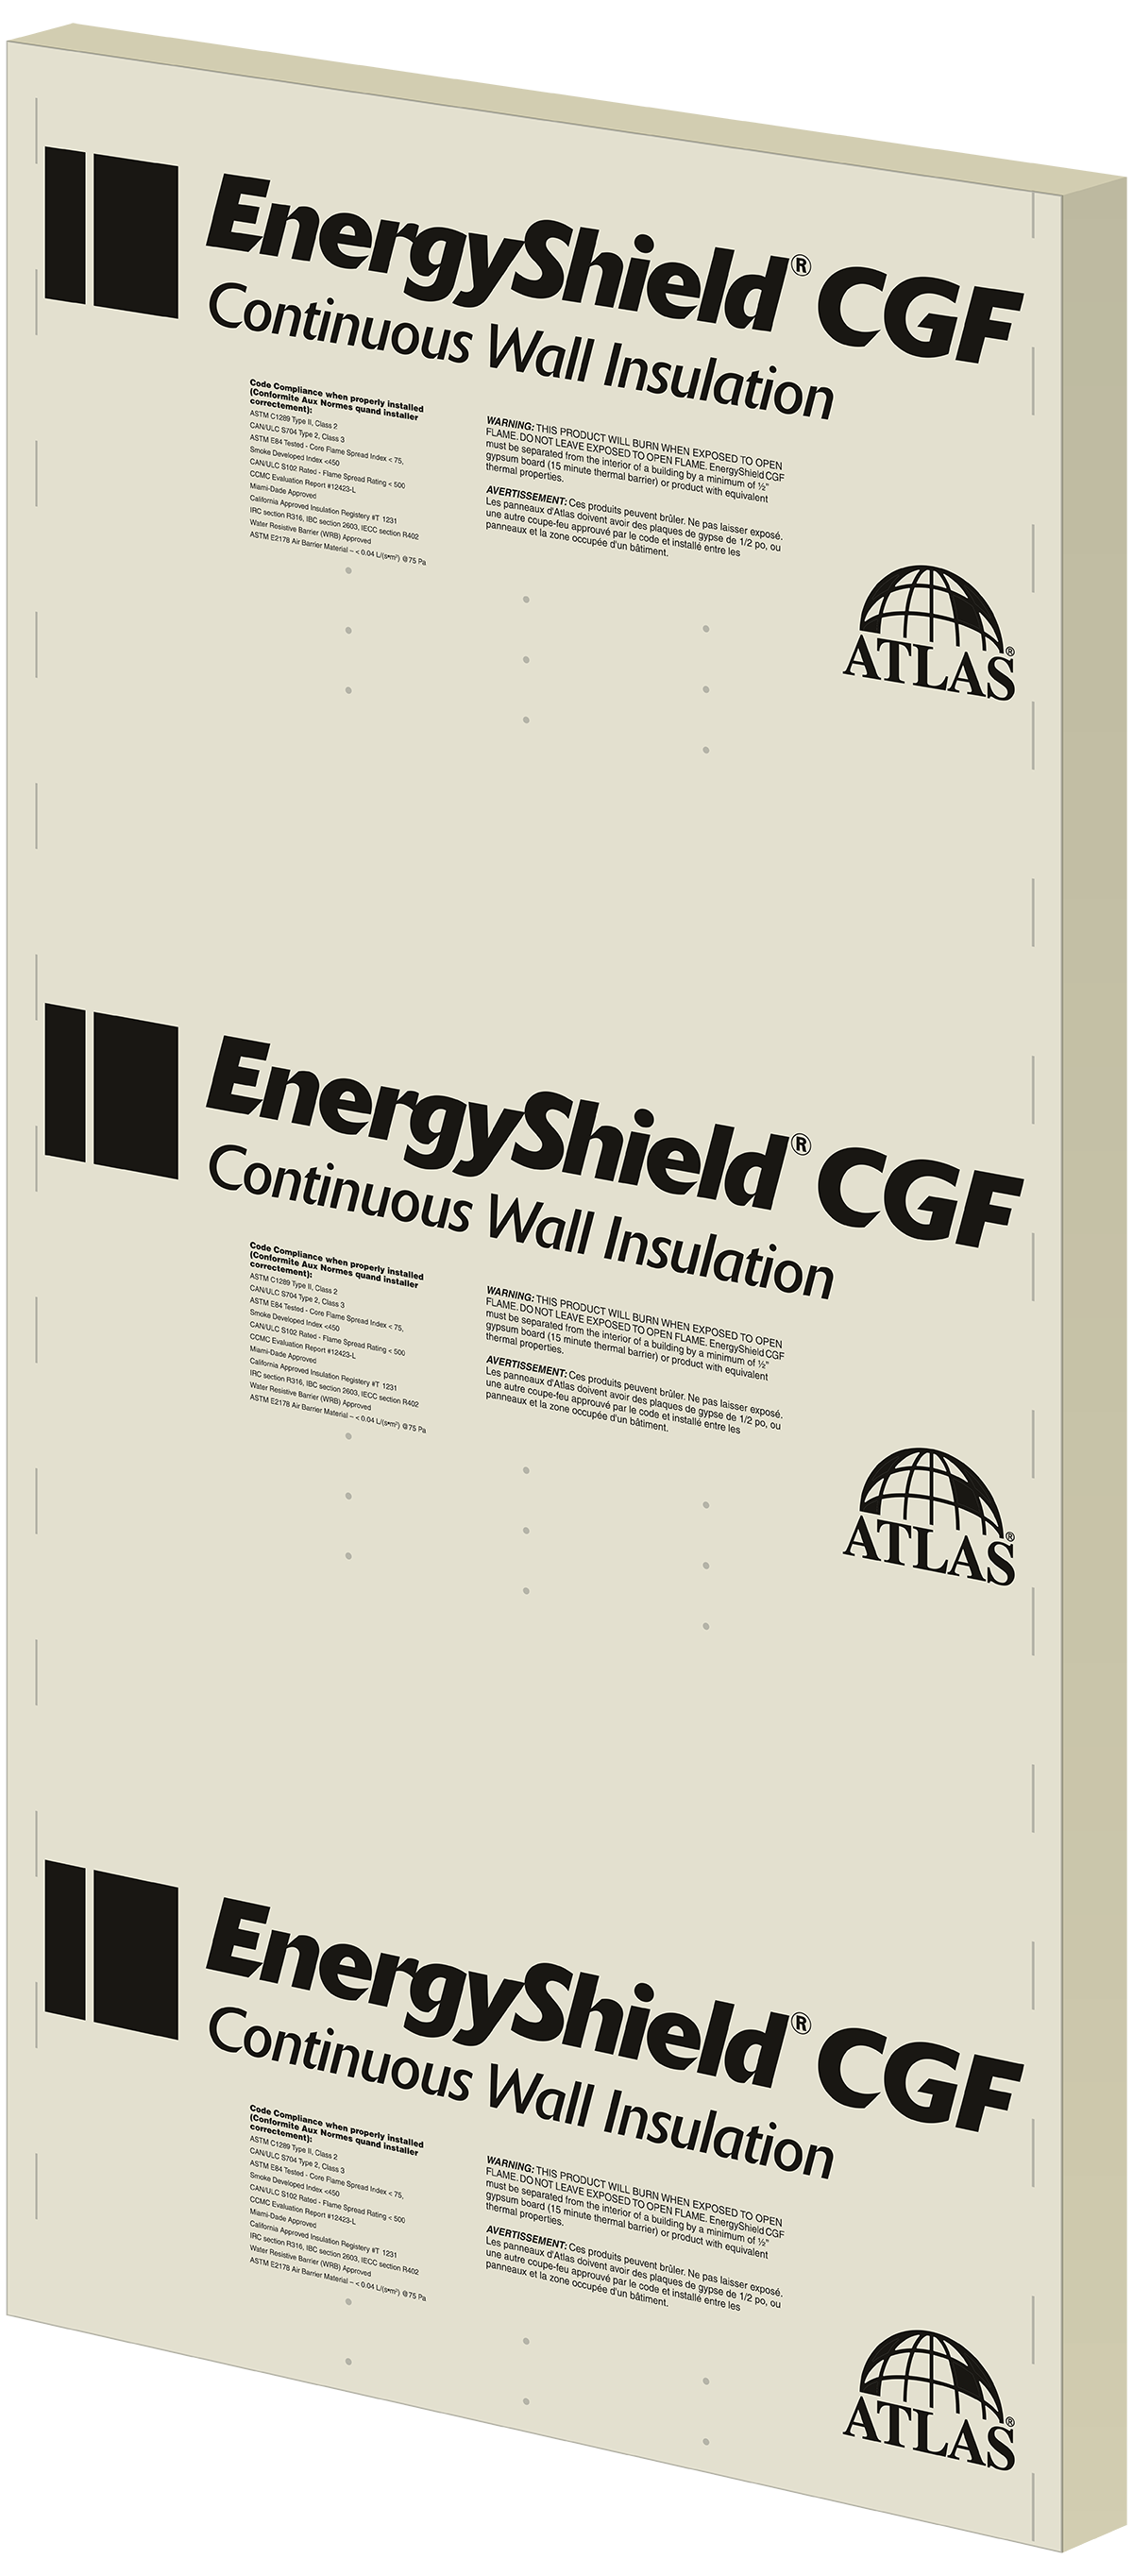 Energyshield Wall Insulation BPS Group Inc.